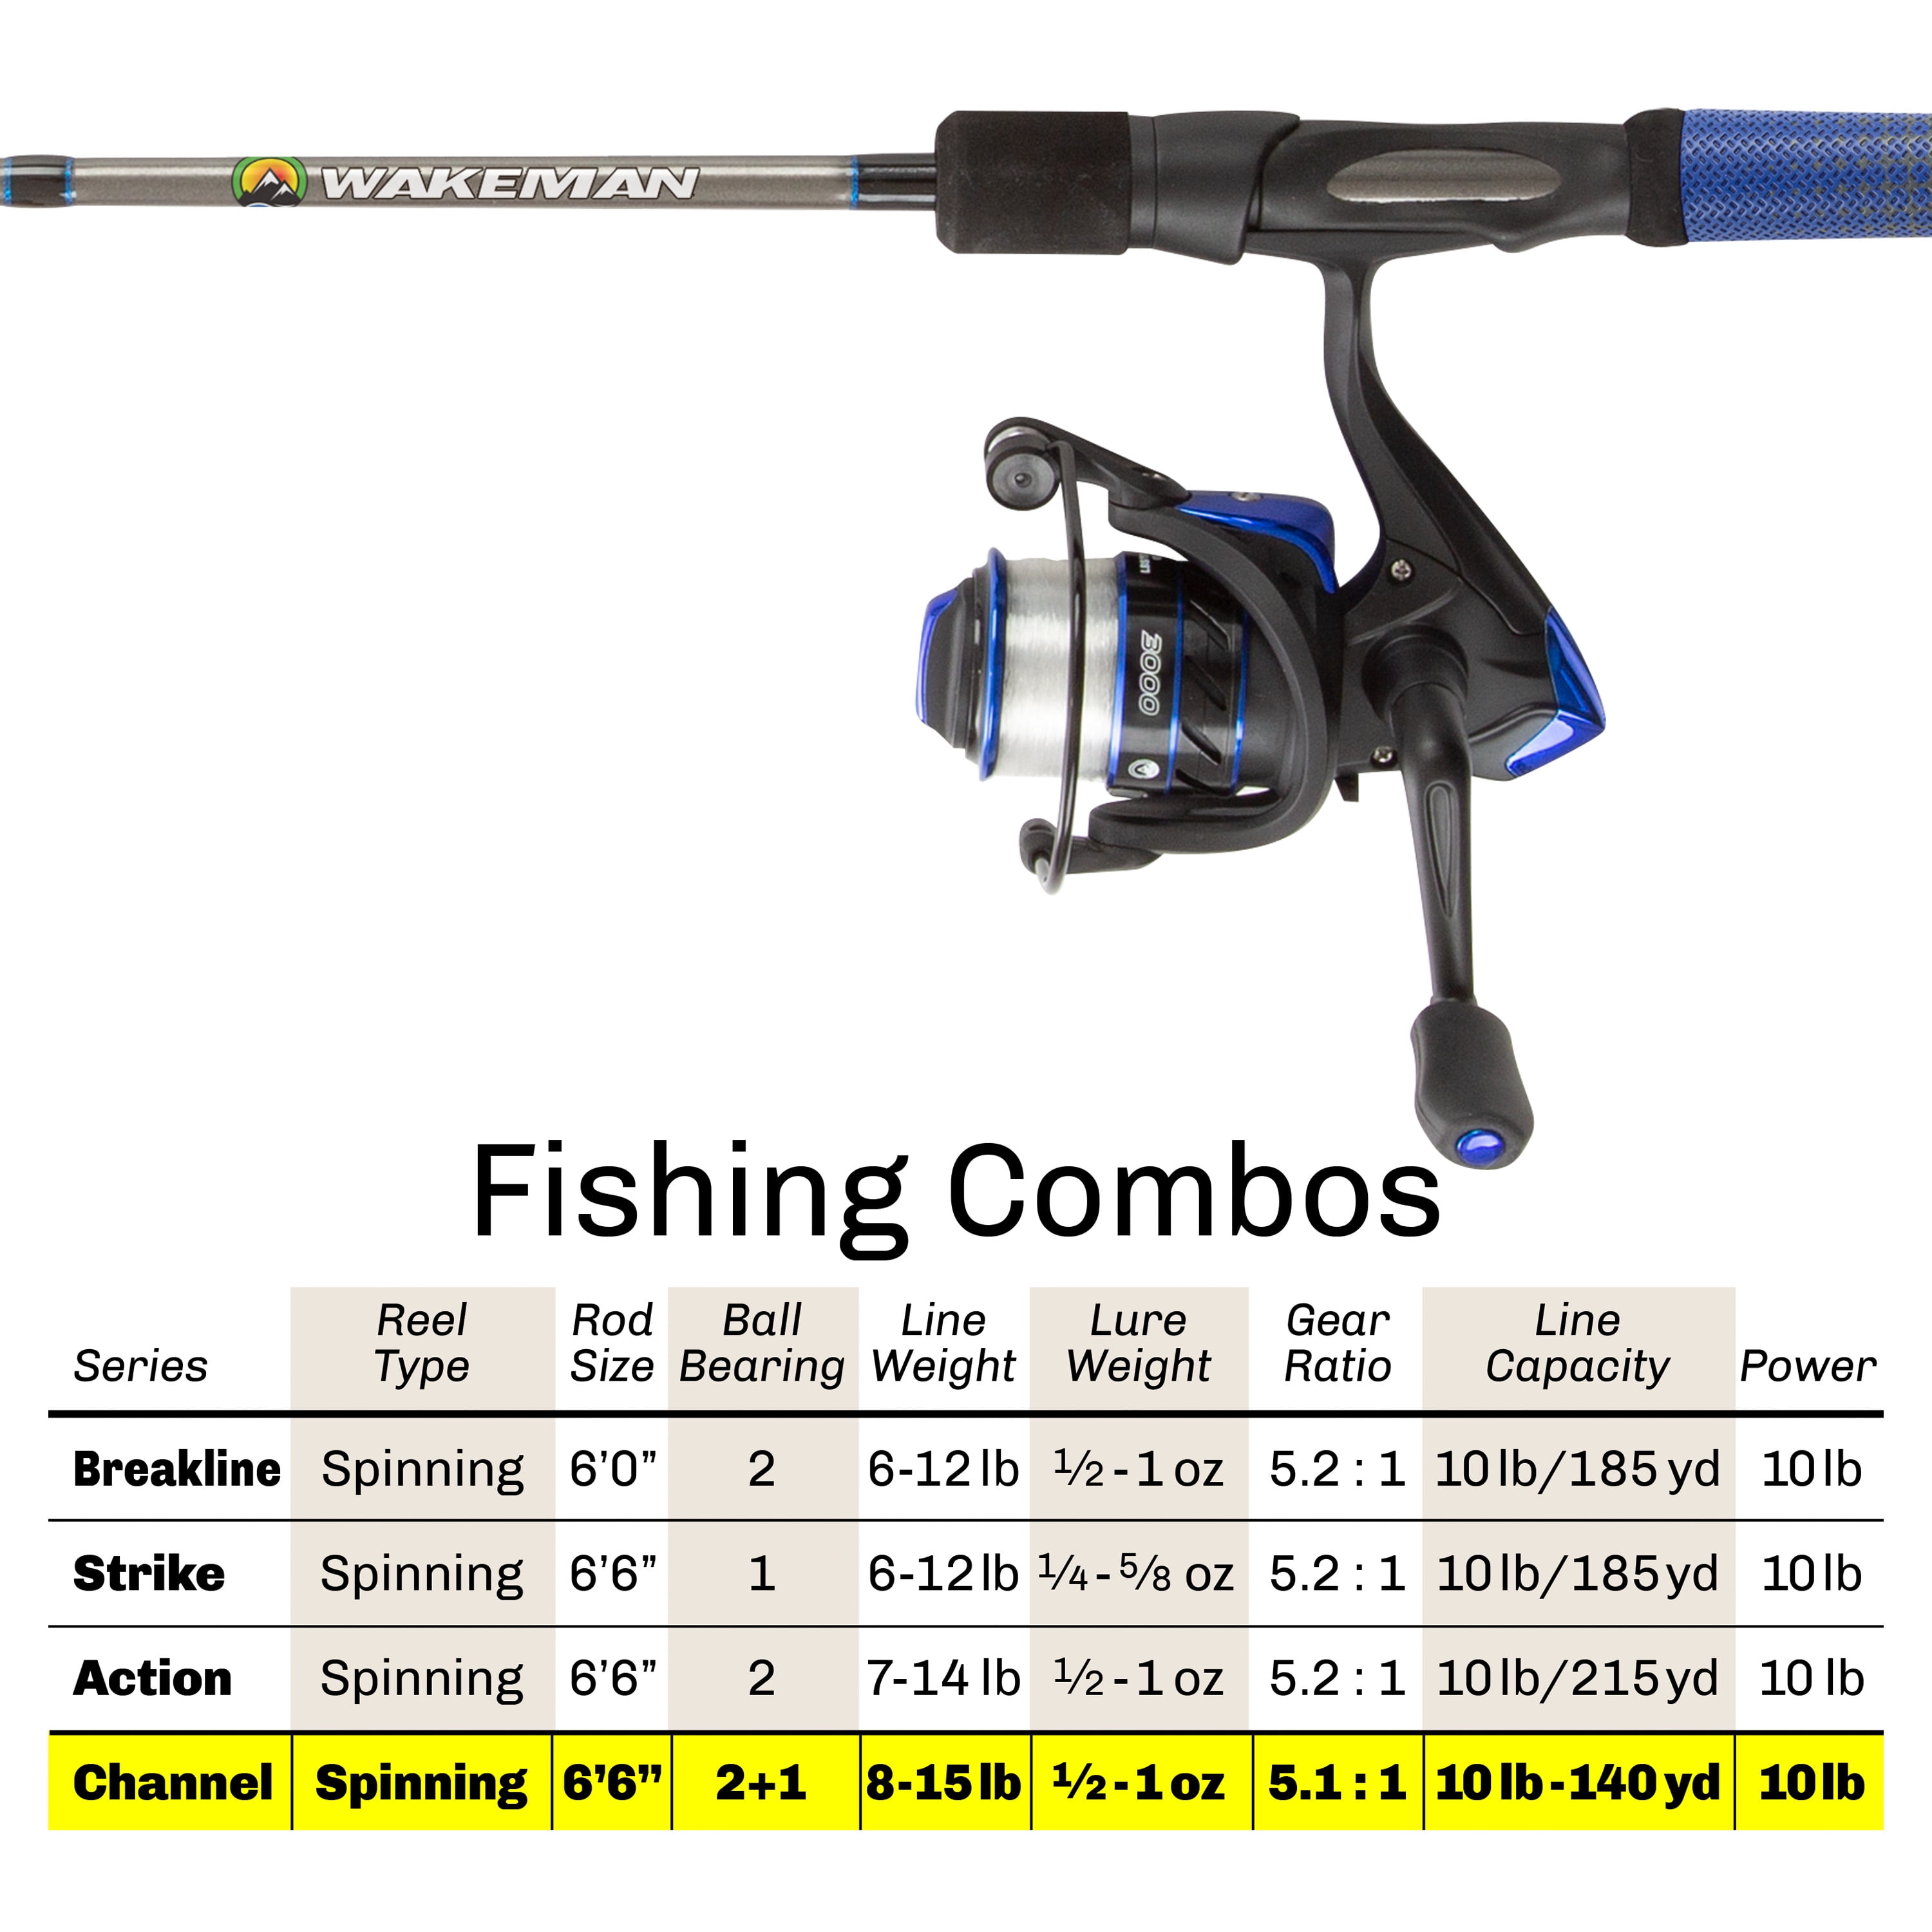 Wakeman Fishing Rod and Reel Combo for Bass, Salmon, or Catfish, Blue 